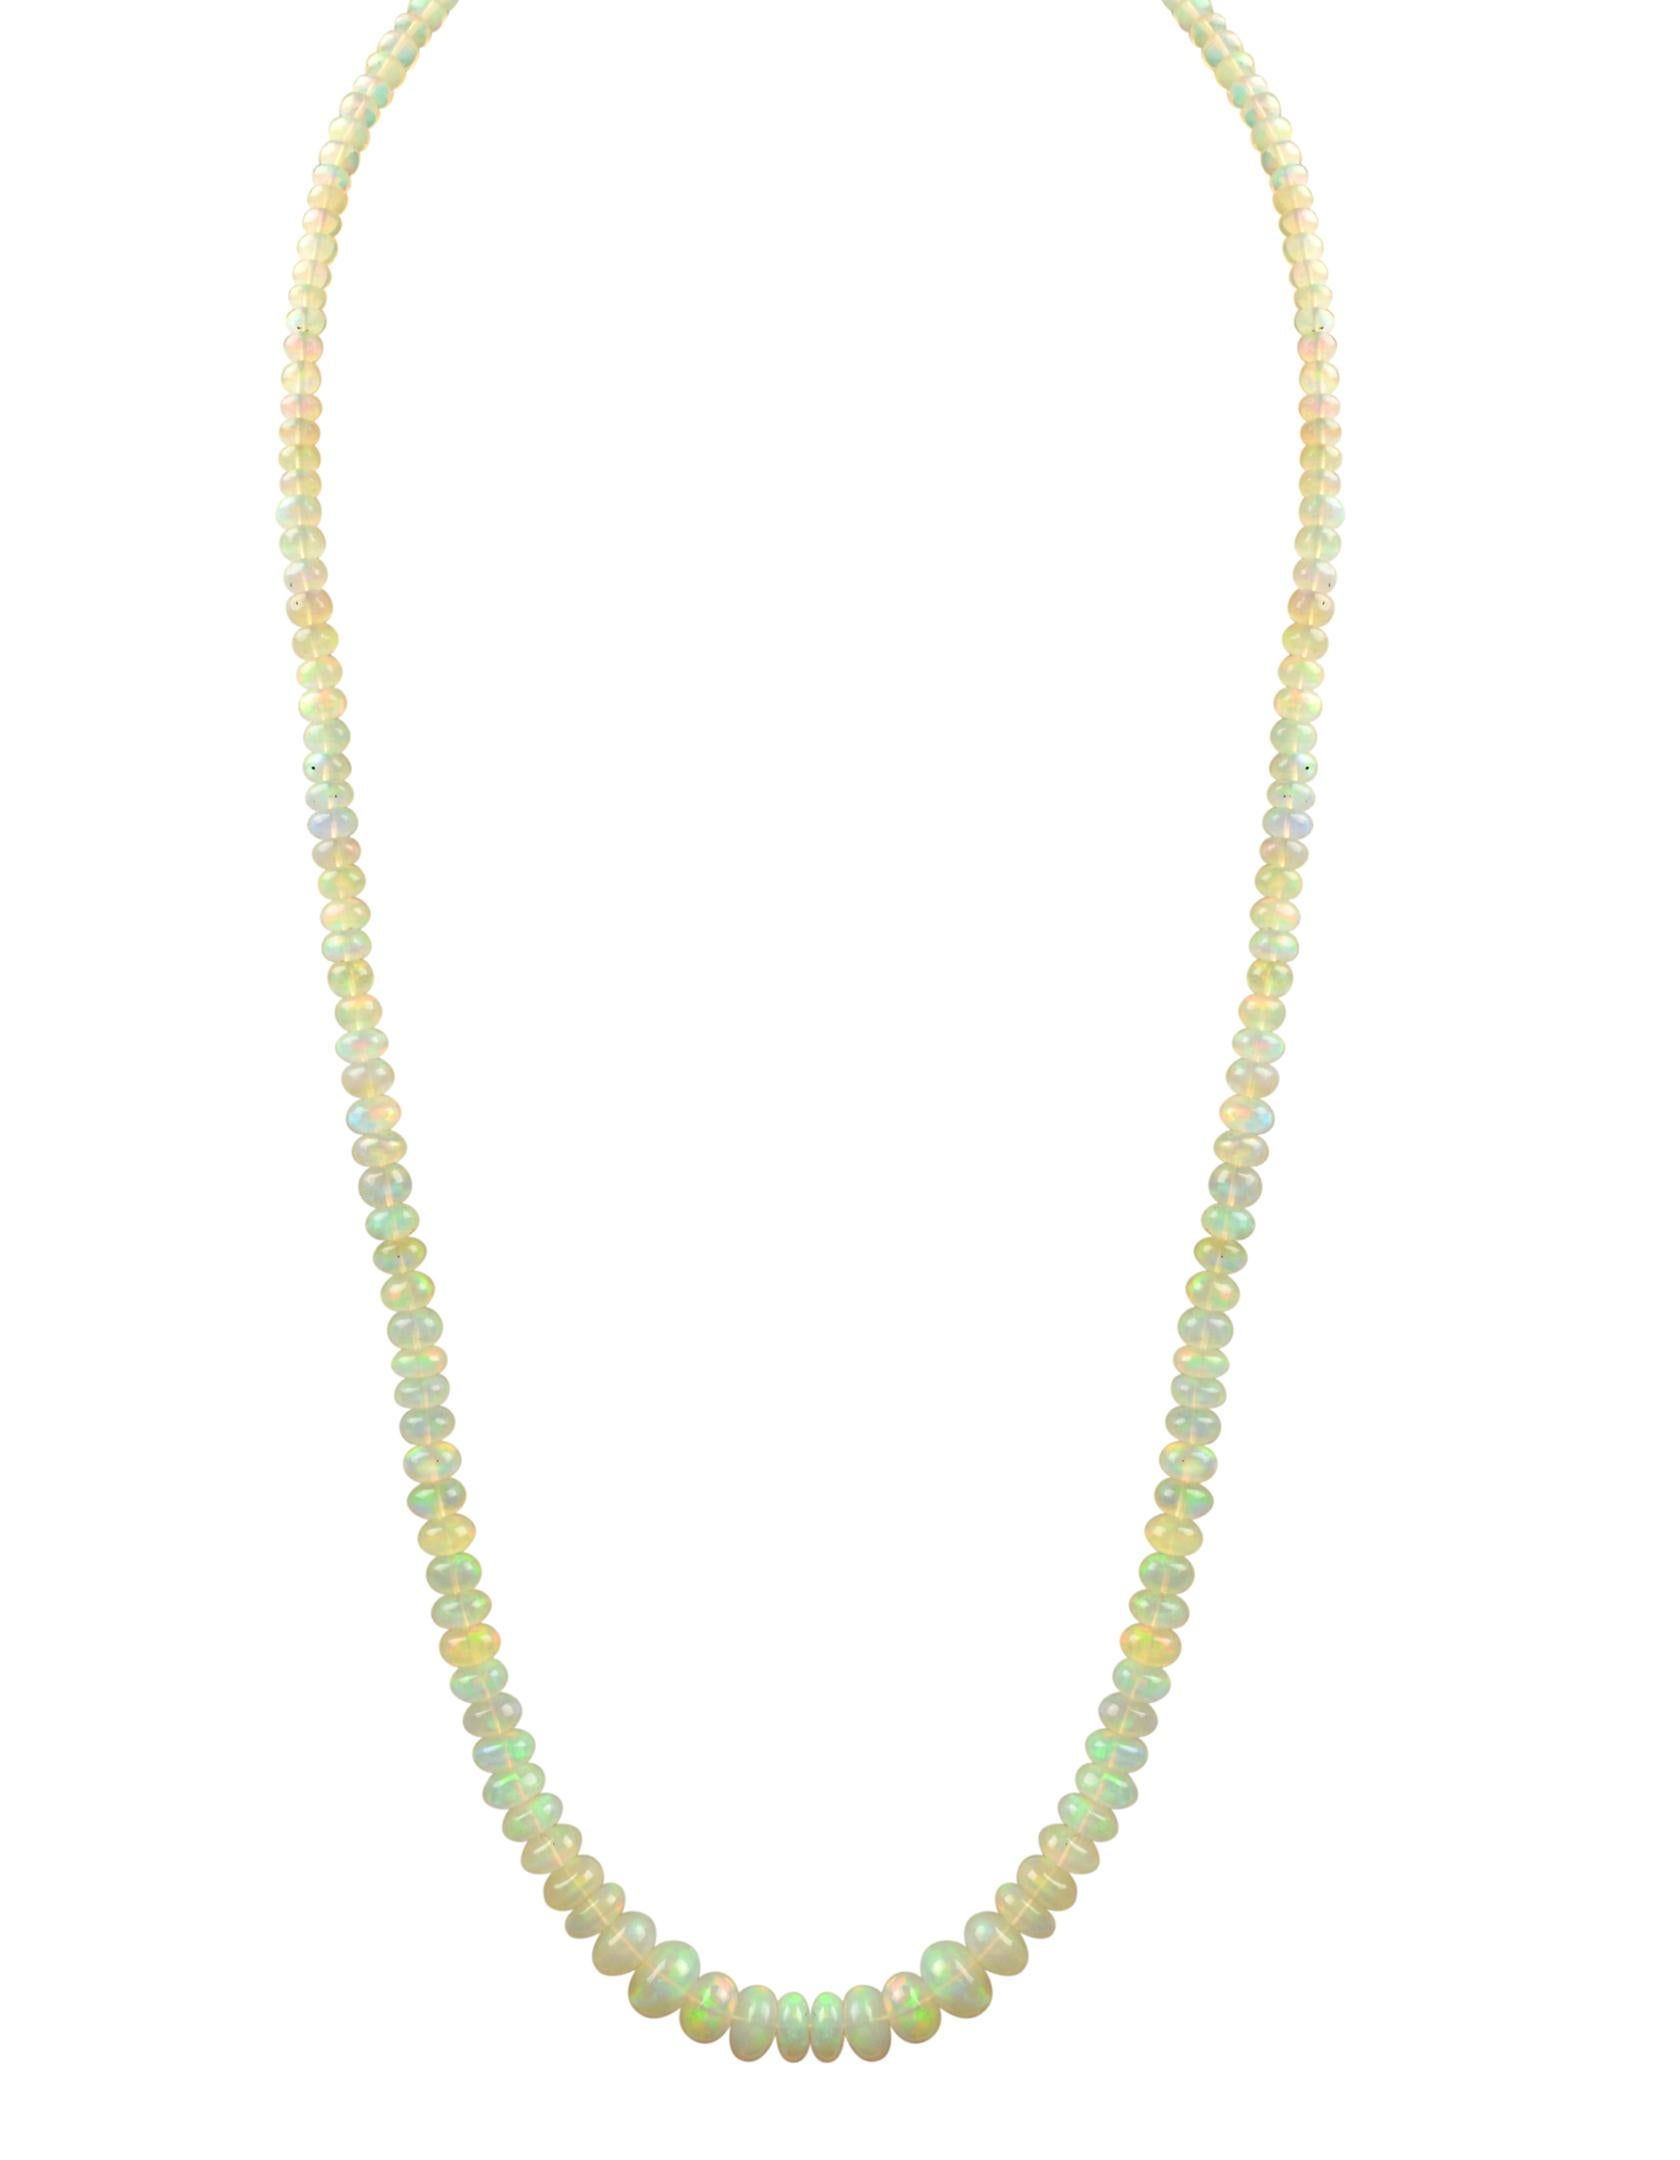  Natural Opal single strand Bead Necklace with 14 Karat lobster gold Clasp. These are Ethiopian Beads
20 to 21 inch long 
1 layers of Natural opal  Beads
These are Smooth beads , have  very much  Luster and shine
Beautiful color reflection of red ,